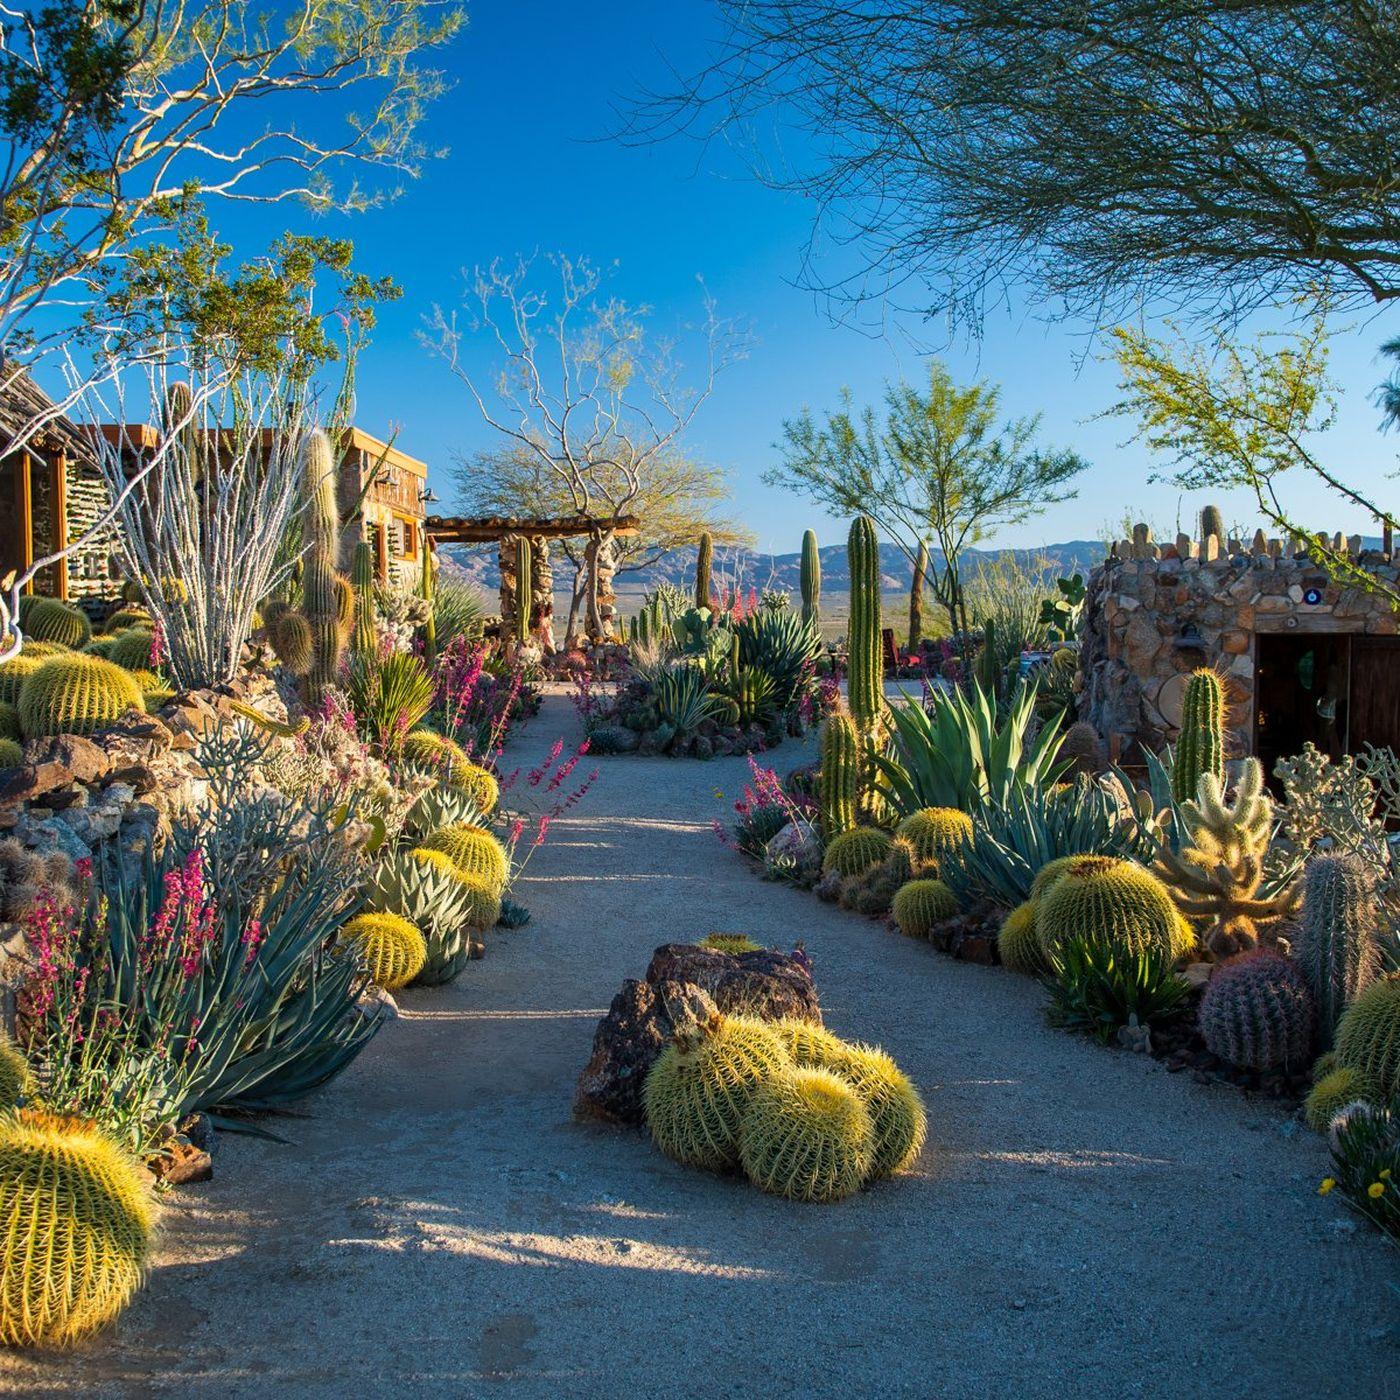 Why cactuses and succulents are the perfect plants for this